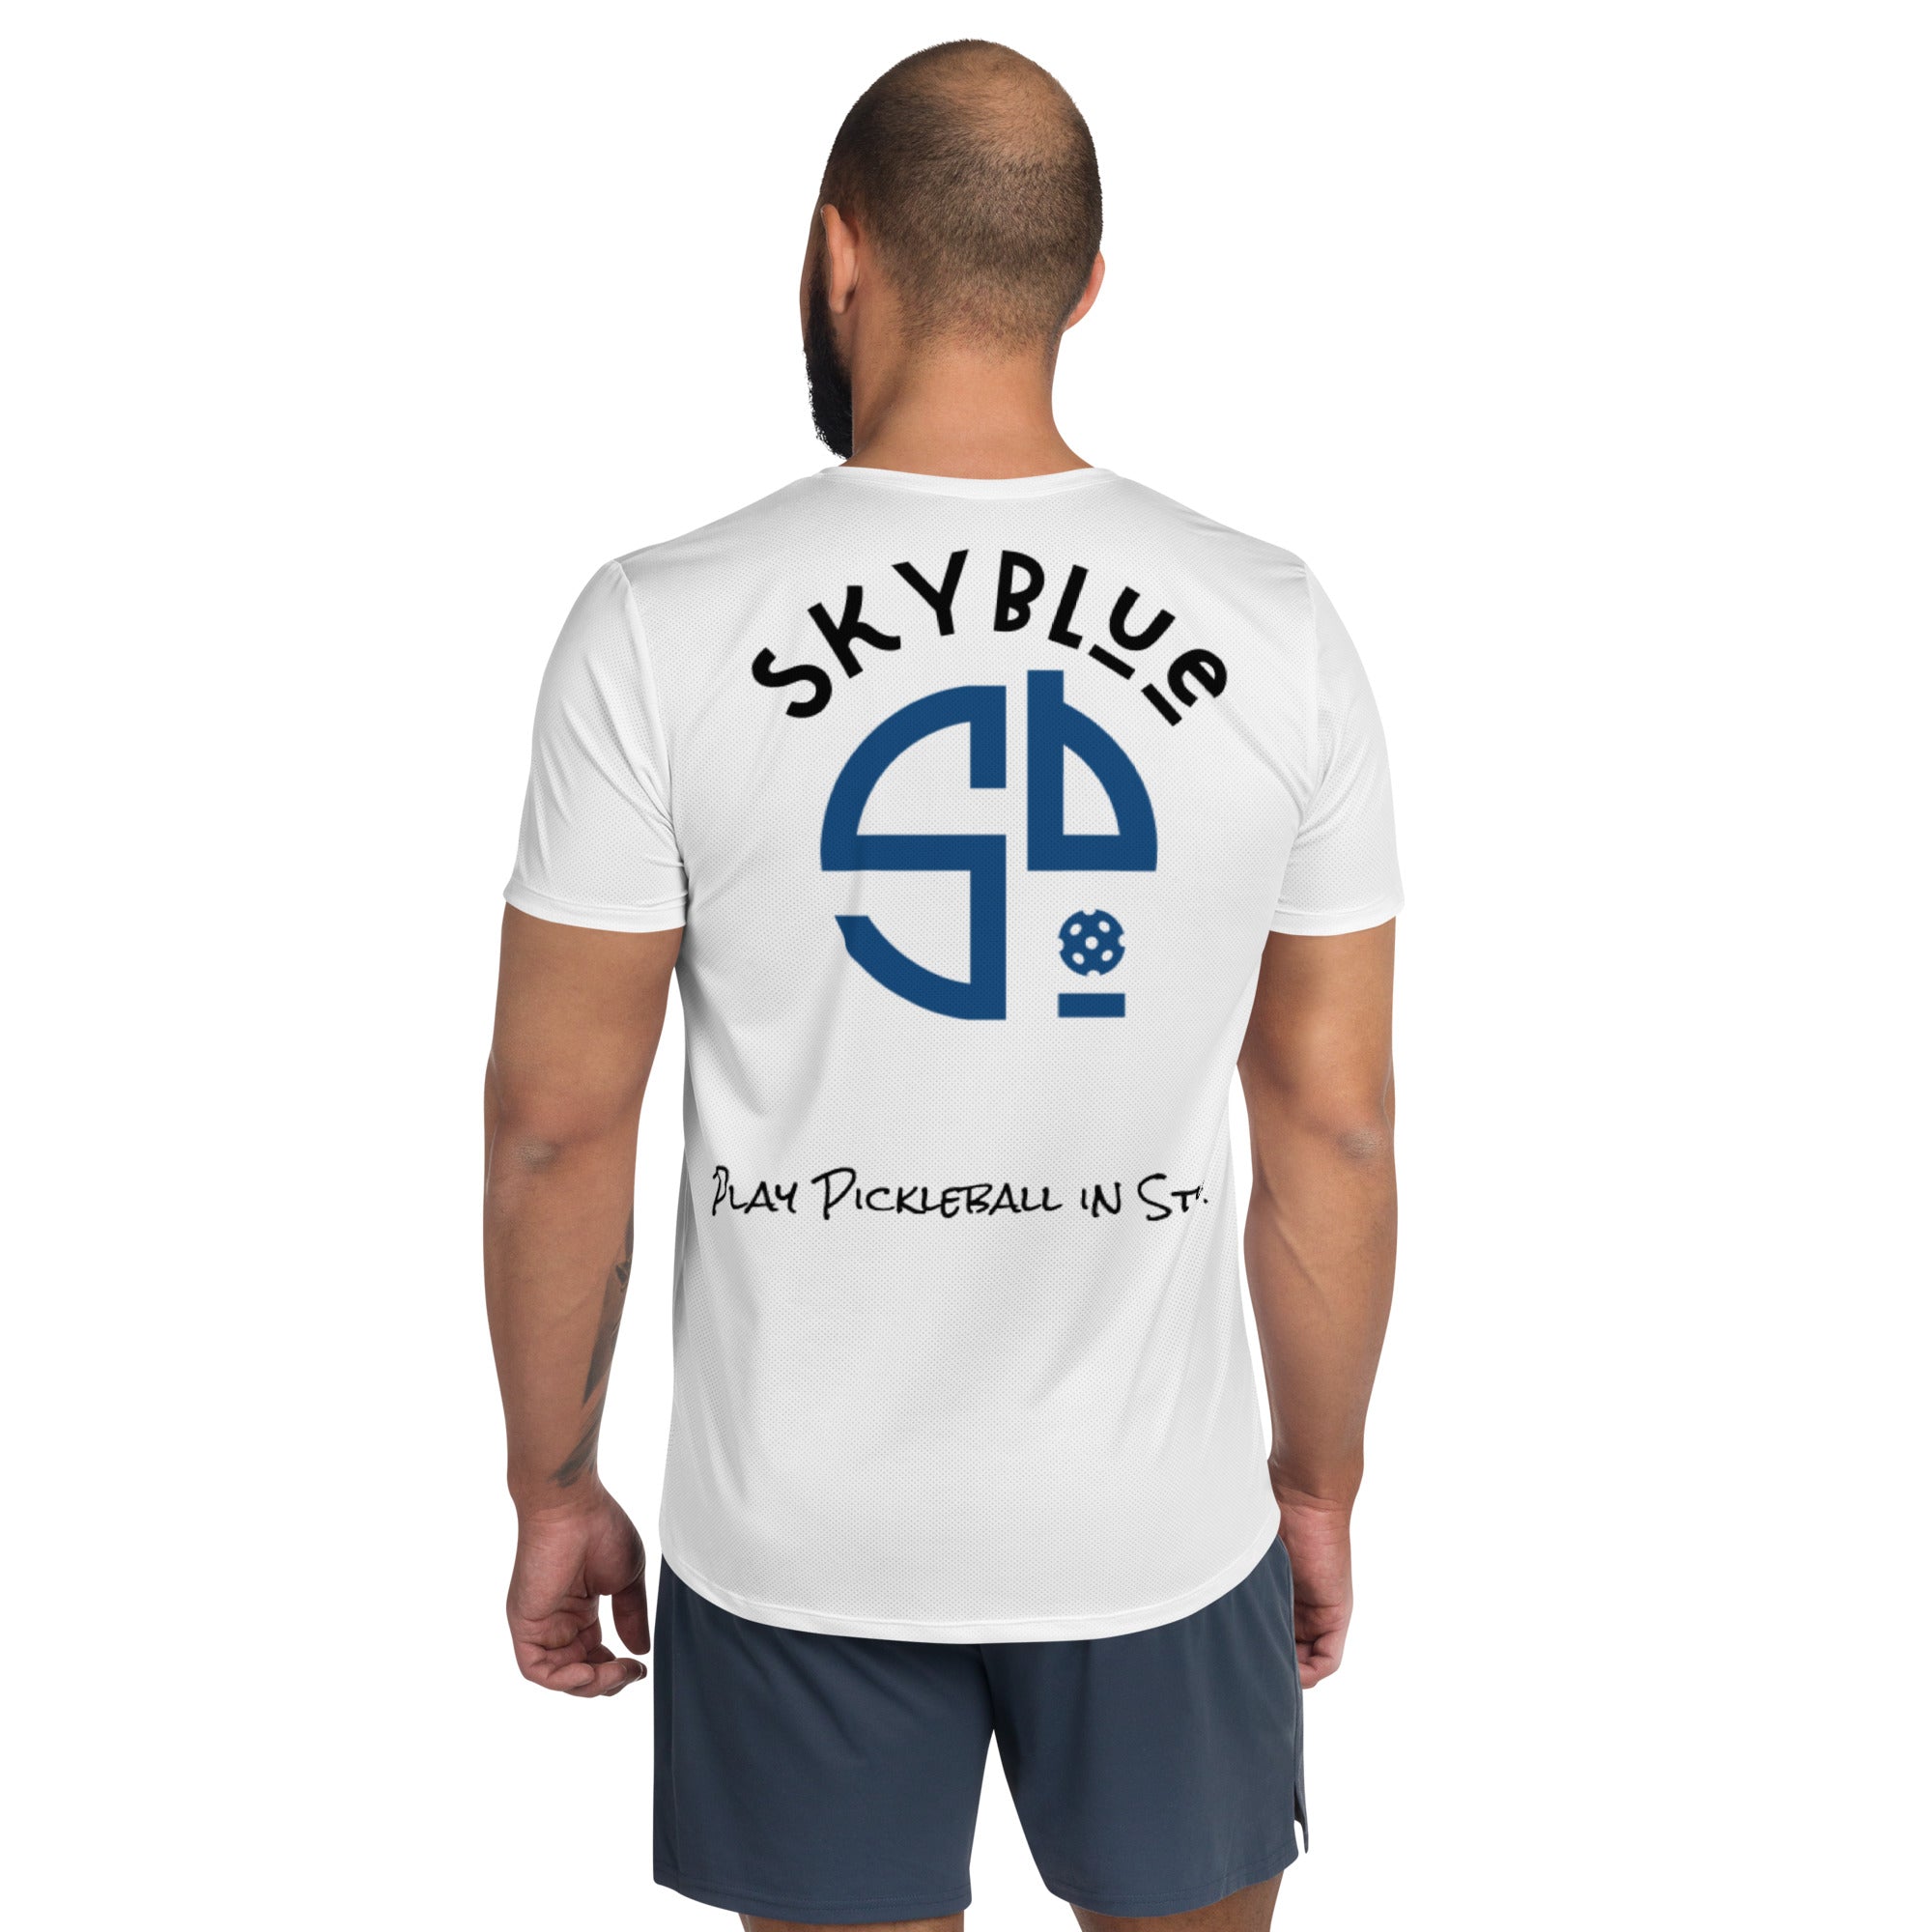 White - Play Pickleball in Style! SKYblue™ Men's Performance Athletic Short Sleeve Shirt w/MaxDri & MicroBlok to compliment the Dink & Drive under the Sun Summertime©